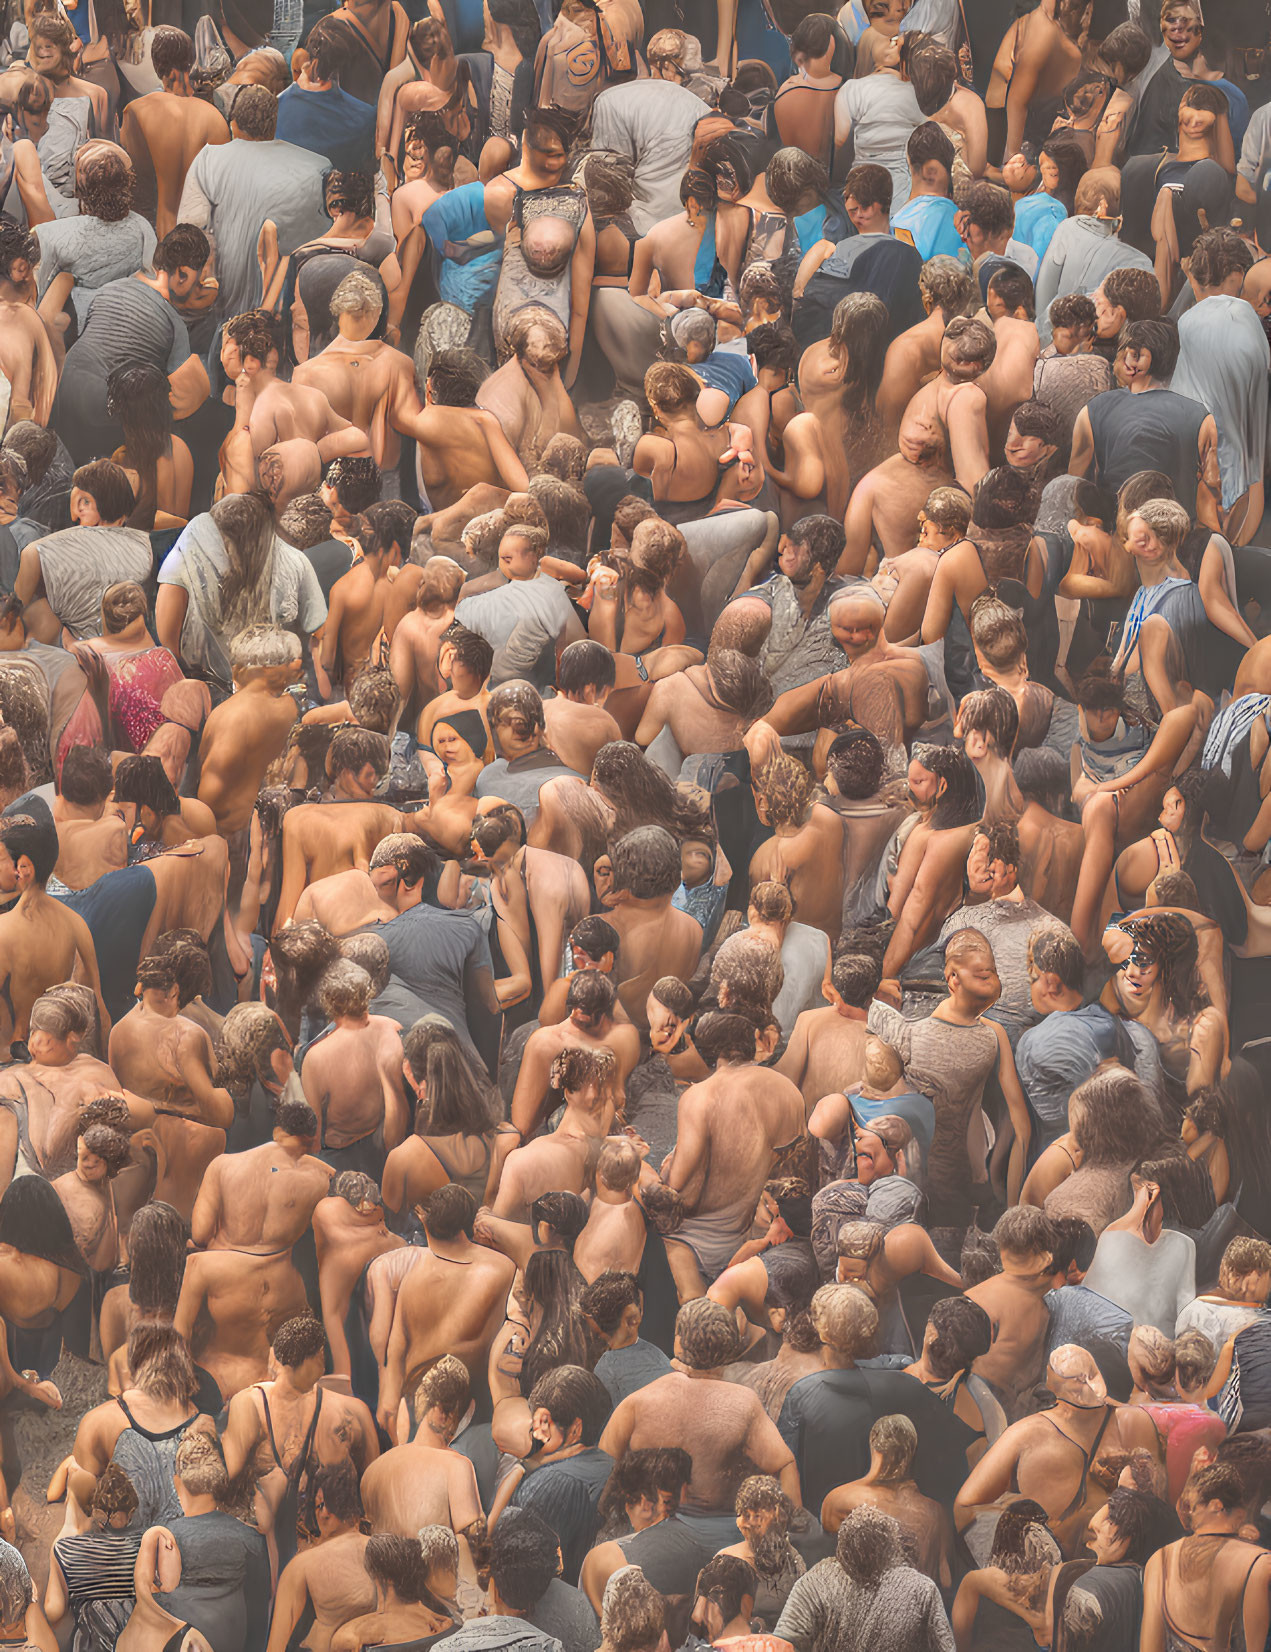 Crowded Scene: Shirtless People in Human Body Mosaic